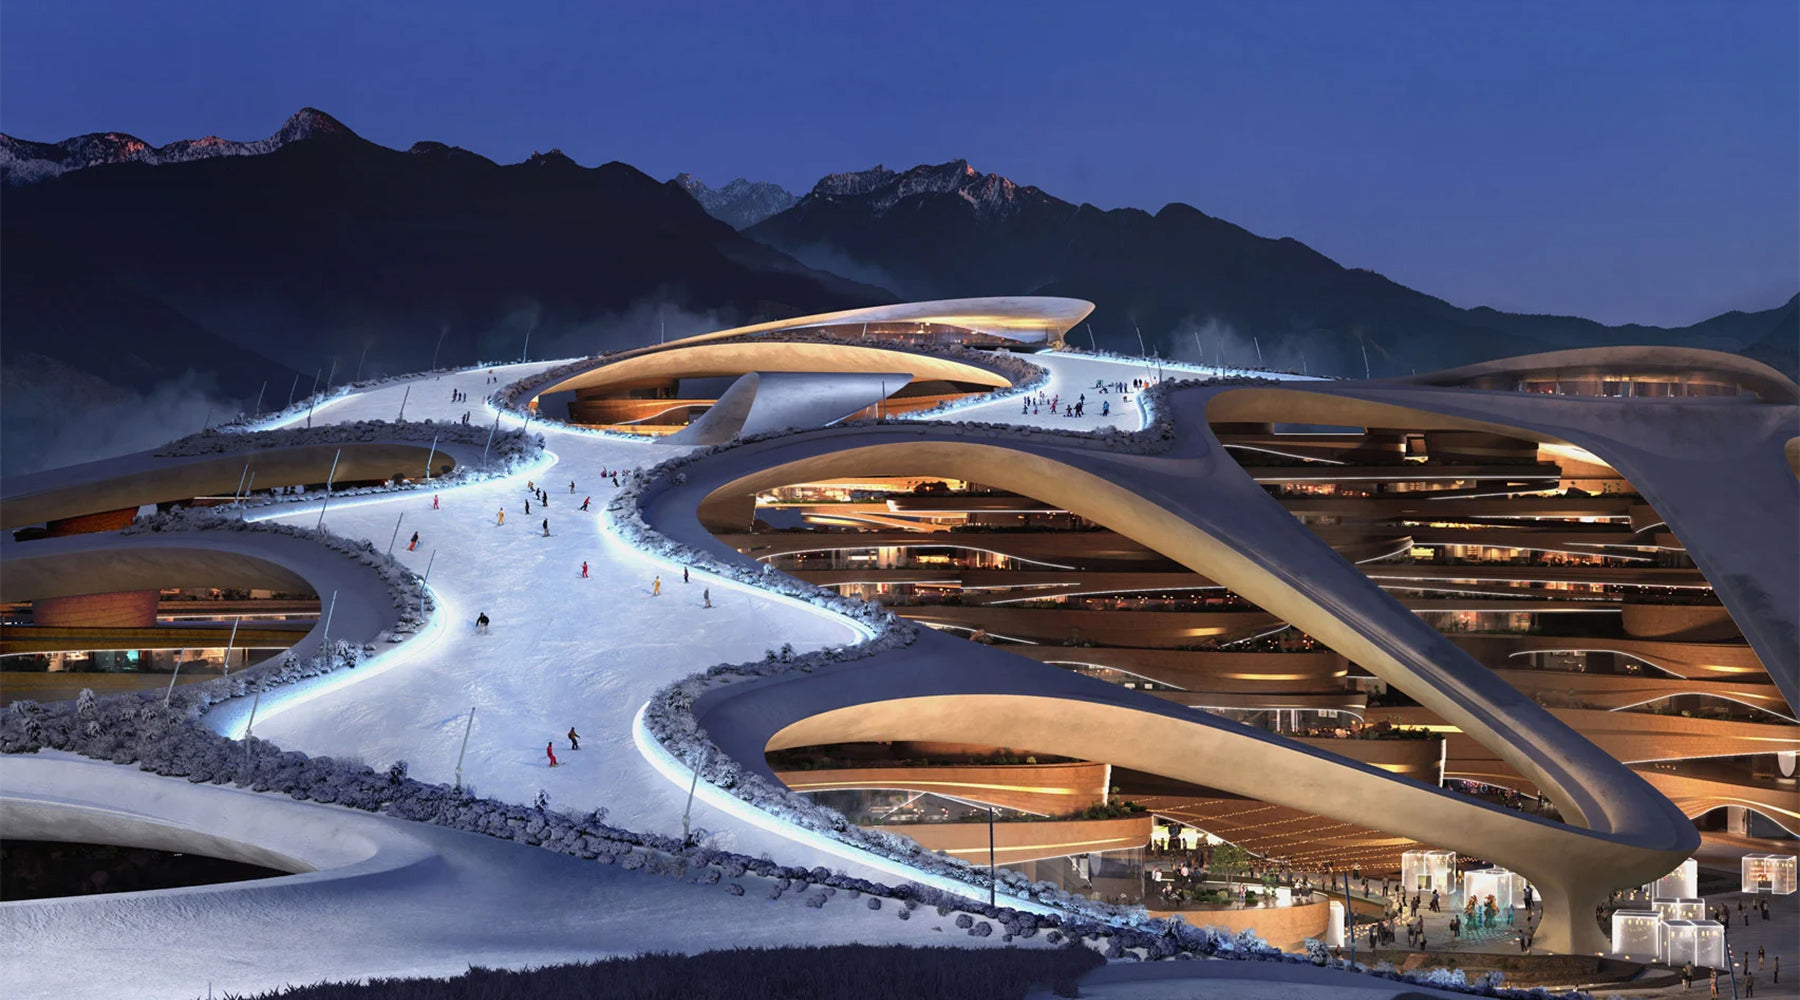 A futuristic ski resort in the desert? What is TROJENA and is it real?